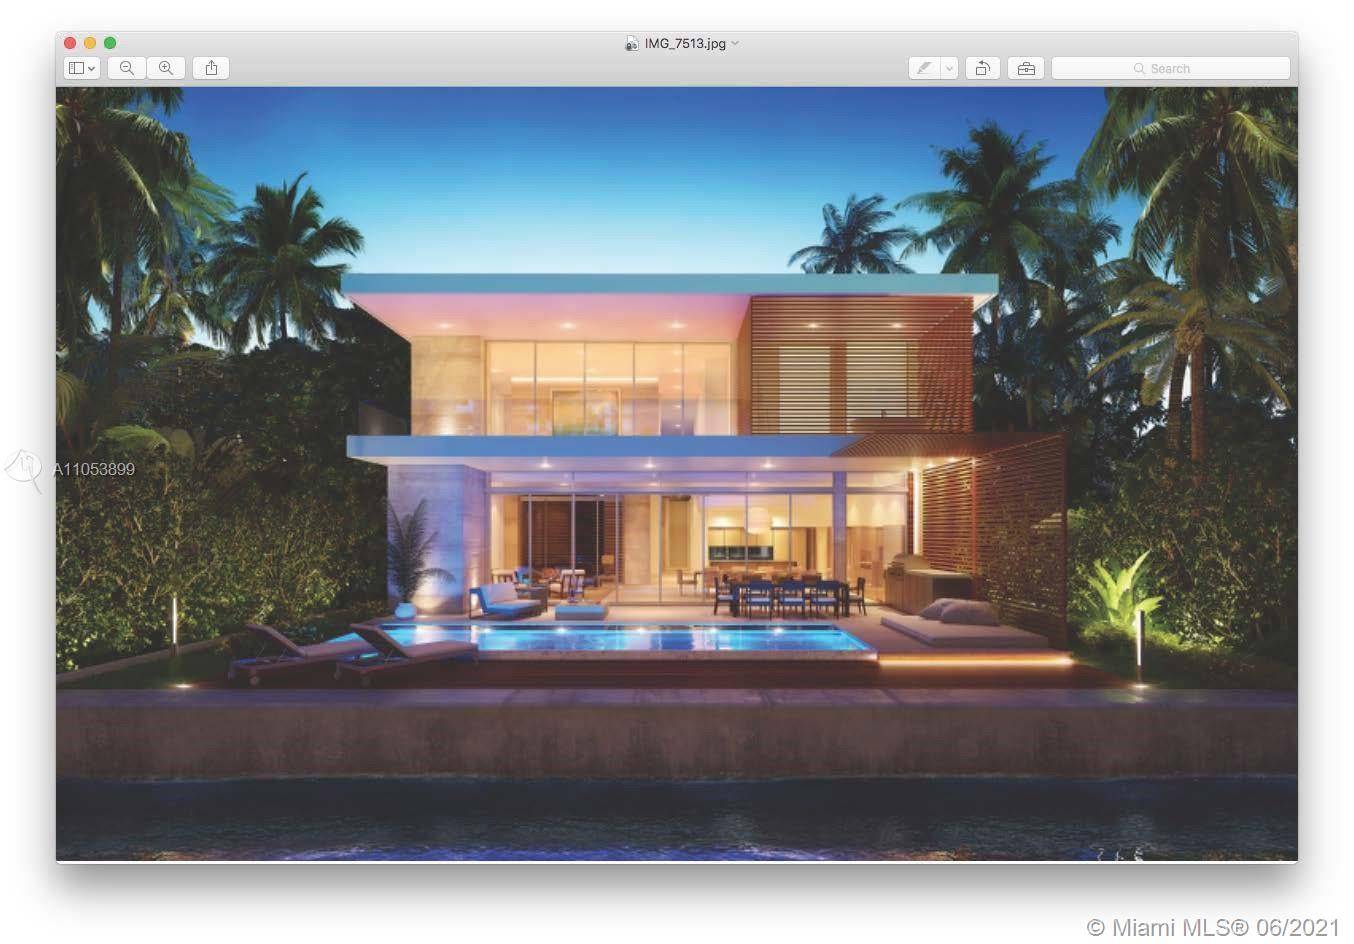 Brand New Contemporary Home designed by renowned architect Max Strang coming Summer 2022.